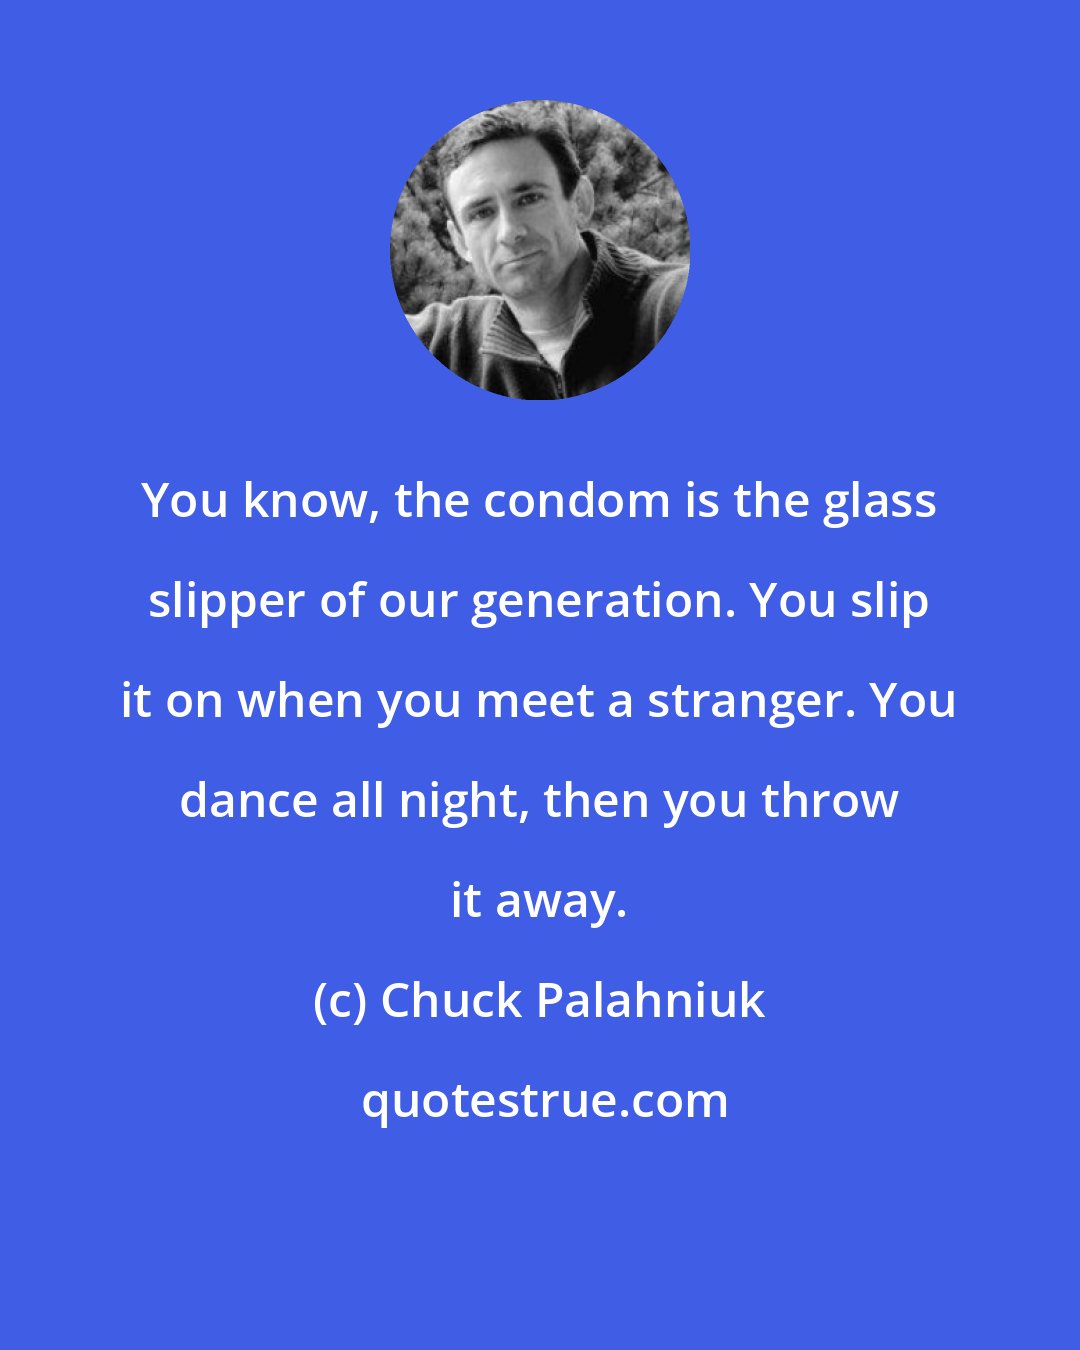 Chuck Palahniuk: You know, the condom is the glass slipper of our generation. You slip it on when you meet a stranger. You dance all night, then you throw it away.